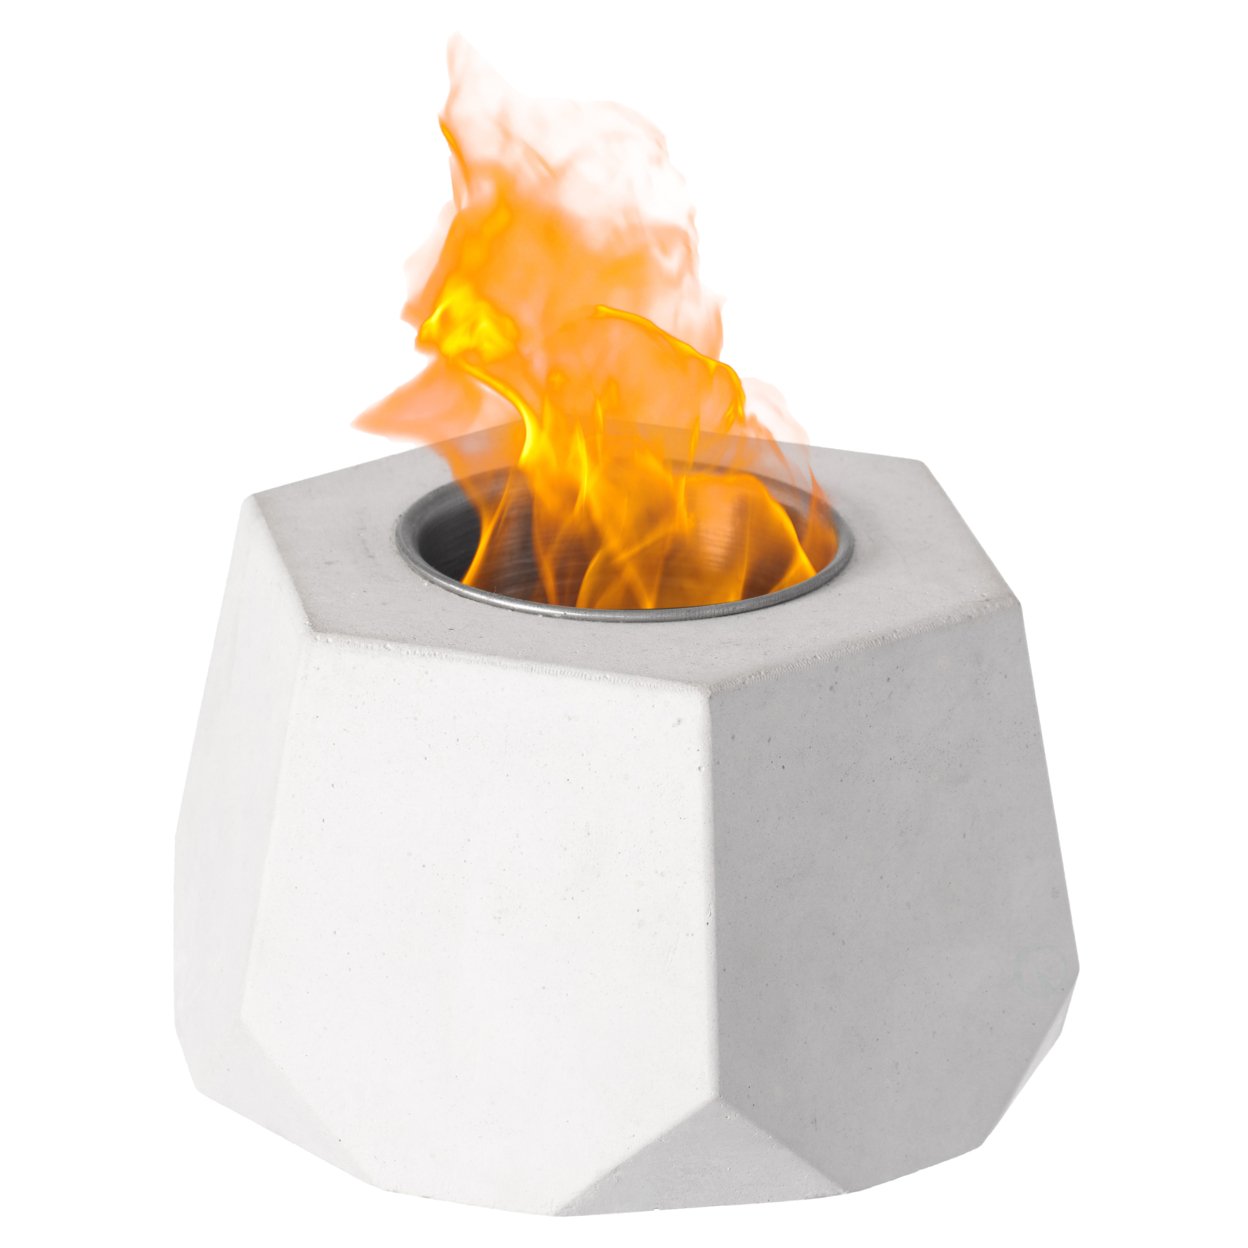 Mini Tabletop Fire Pit Rubbing Alcohol Fireplace Indoor Outdoor Portable Fire Concrete Bowl Pot Fireplace - Round